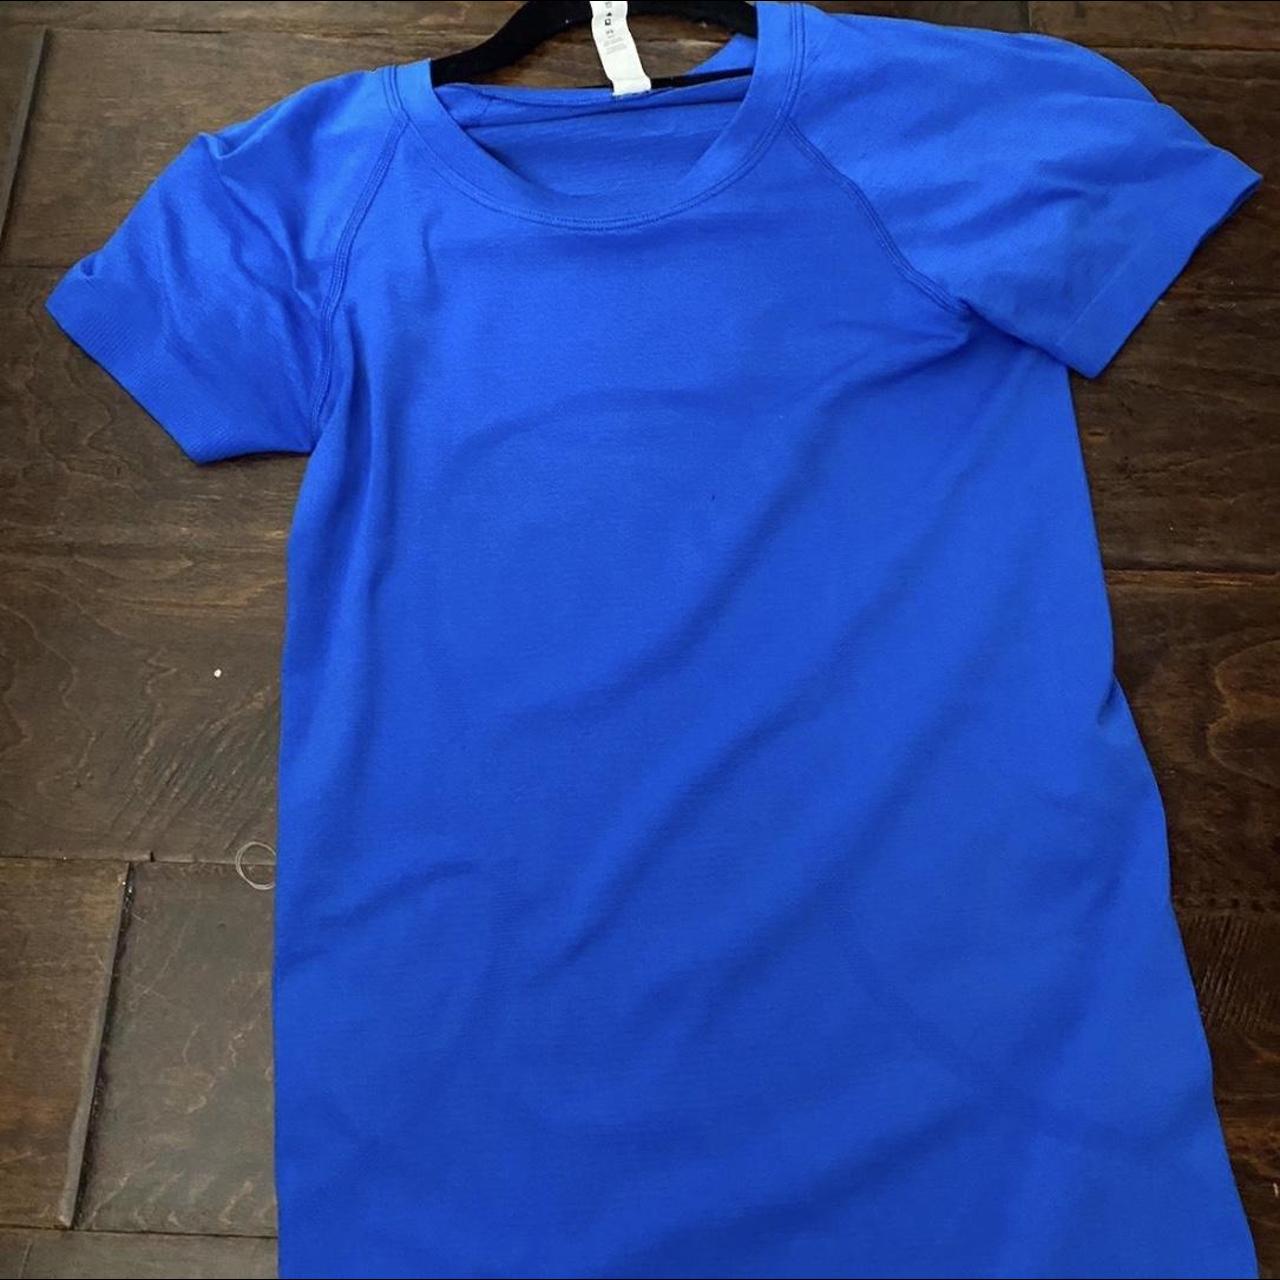 Electric blue only worn once lululemon swiftly size 2 - Depop